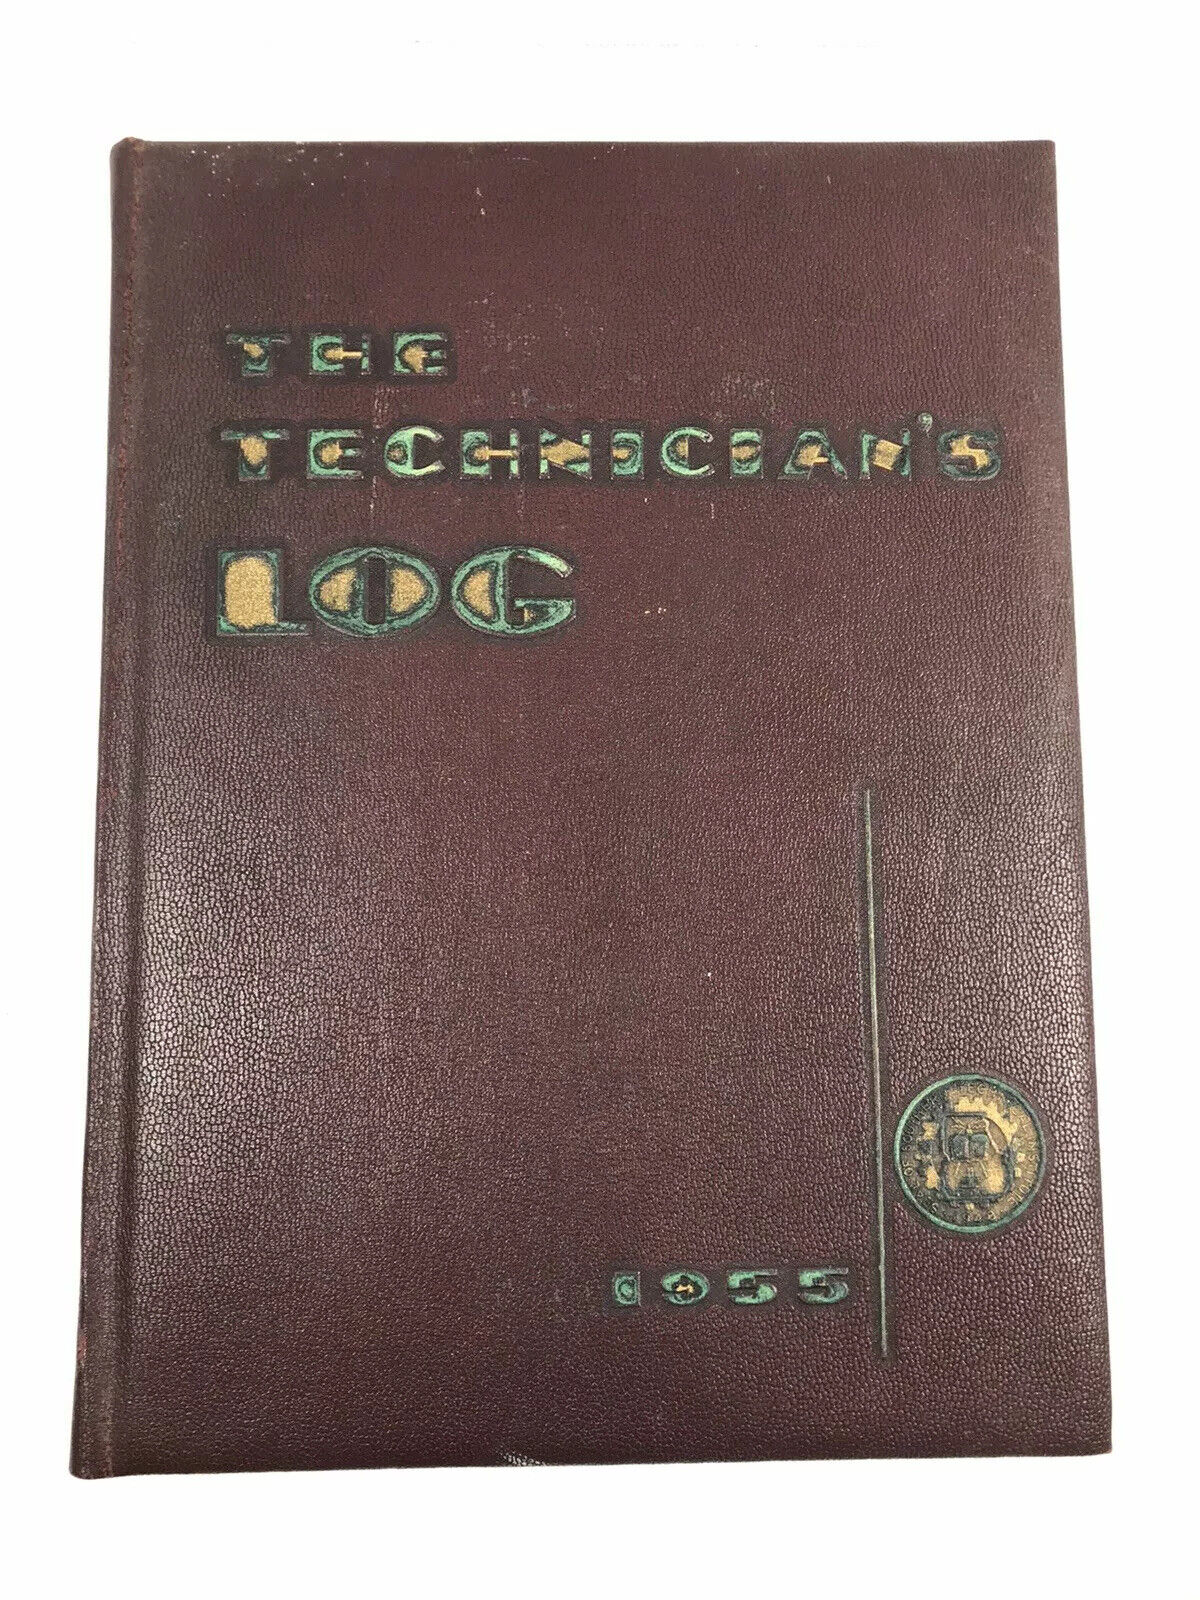 The Technician’s Log 1955 - Southern Technical Institute Yearbook (Georgia)